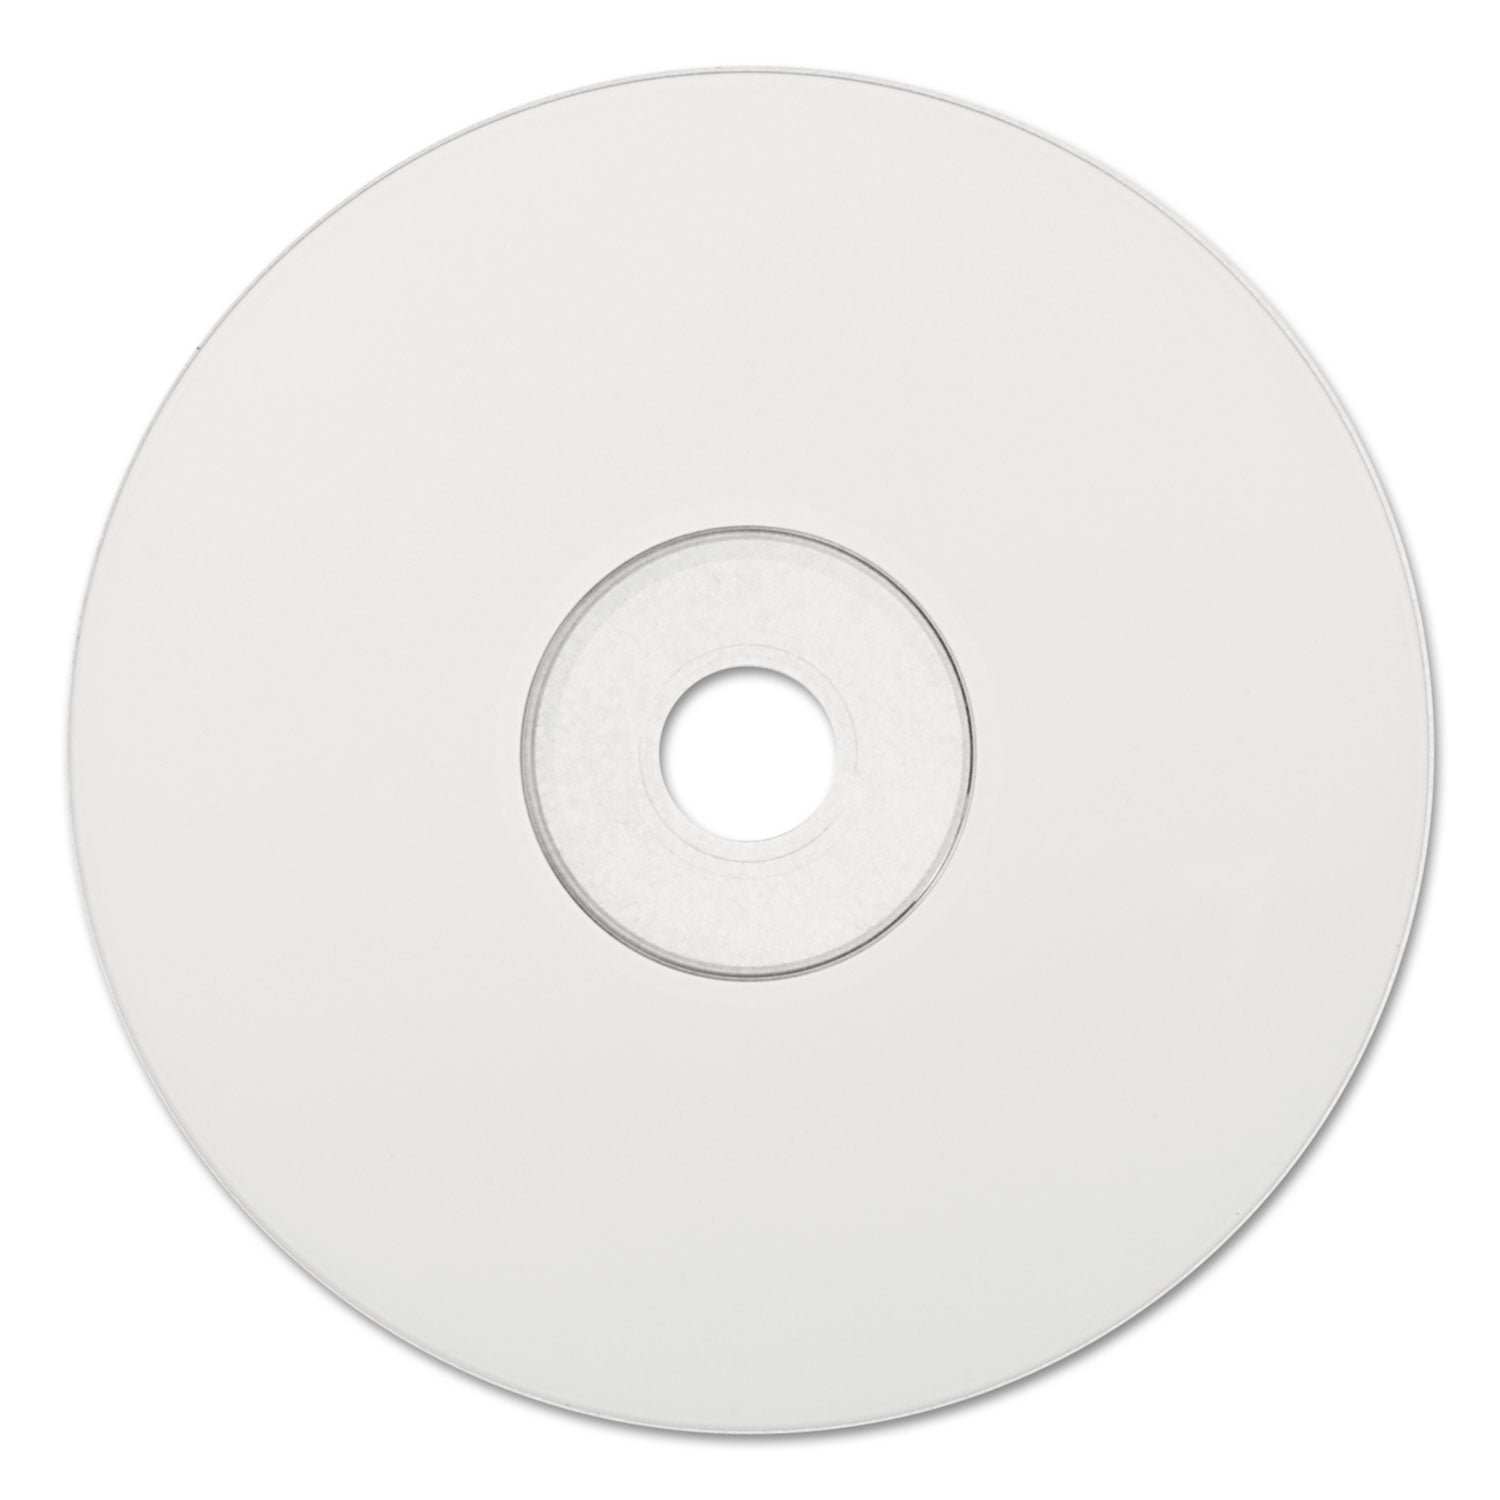 CD-R Printable Recordable Disc, 700 MB, 52x, Spindle, White, 100/Pack - 